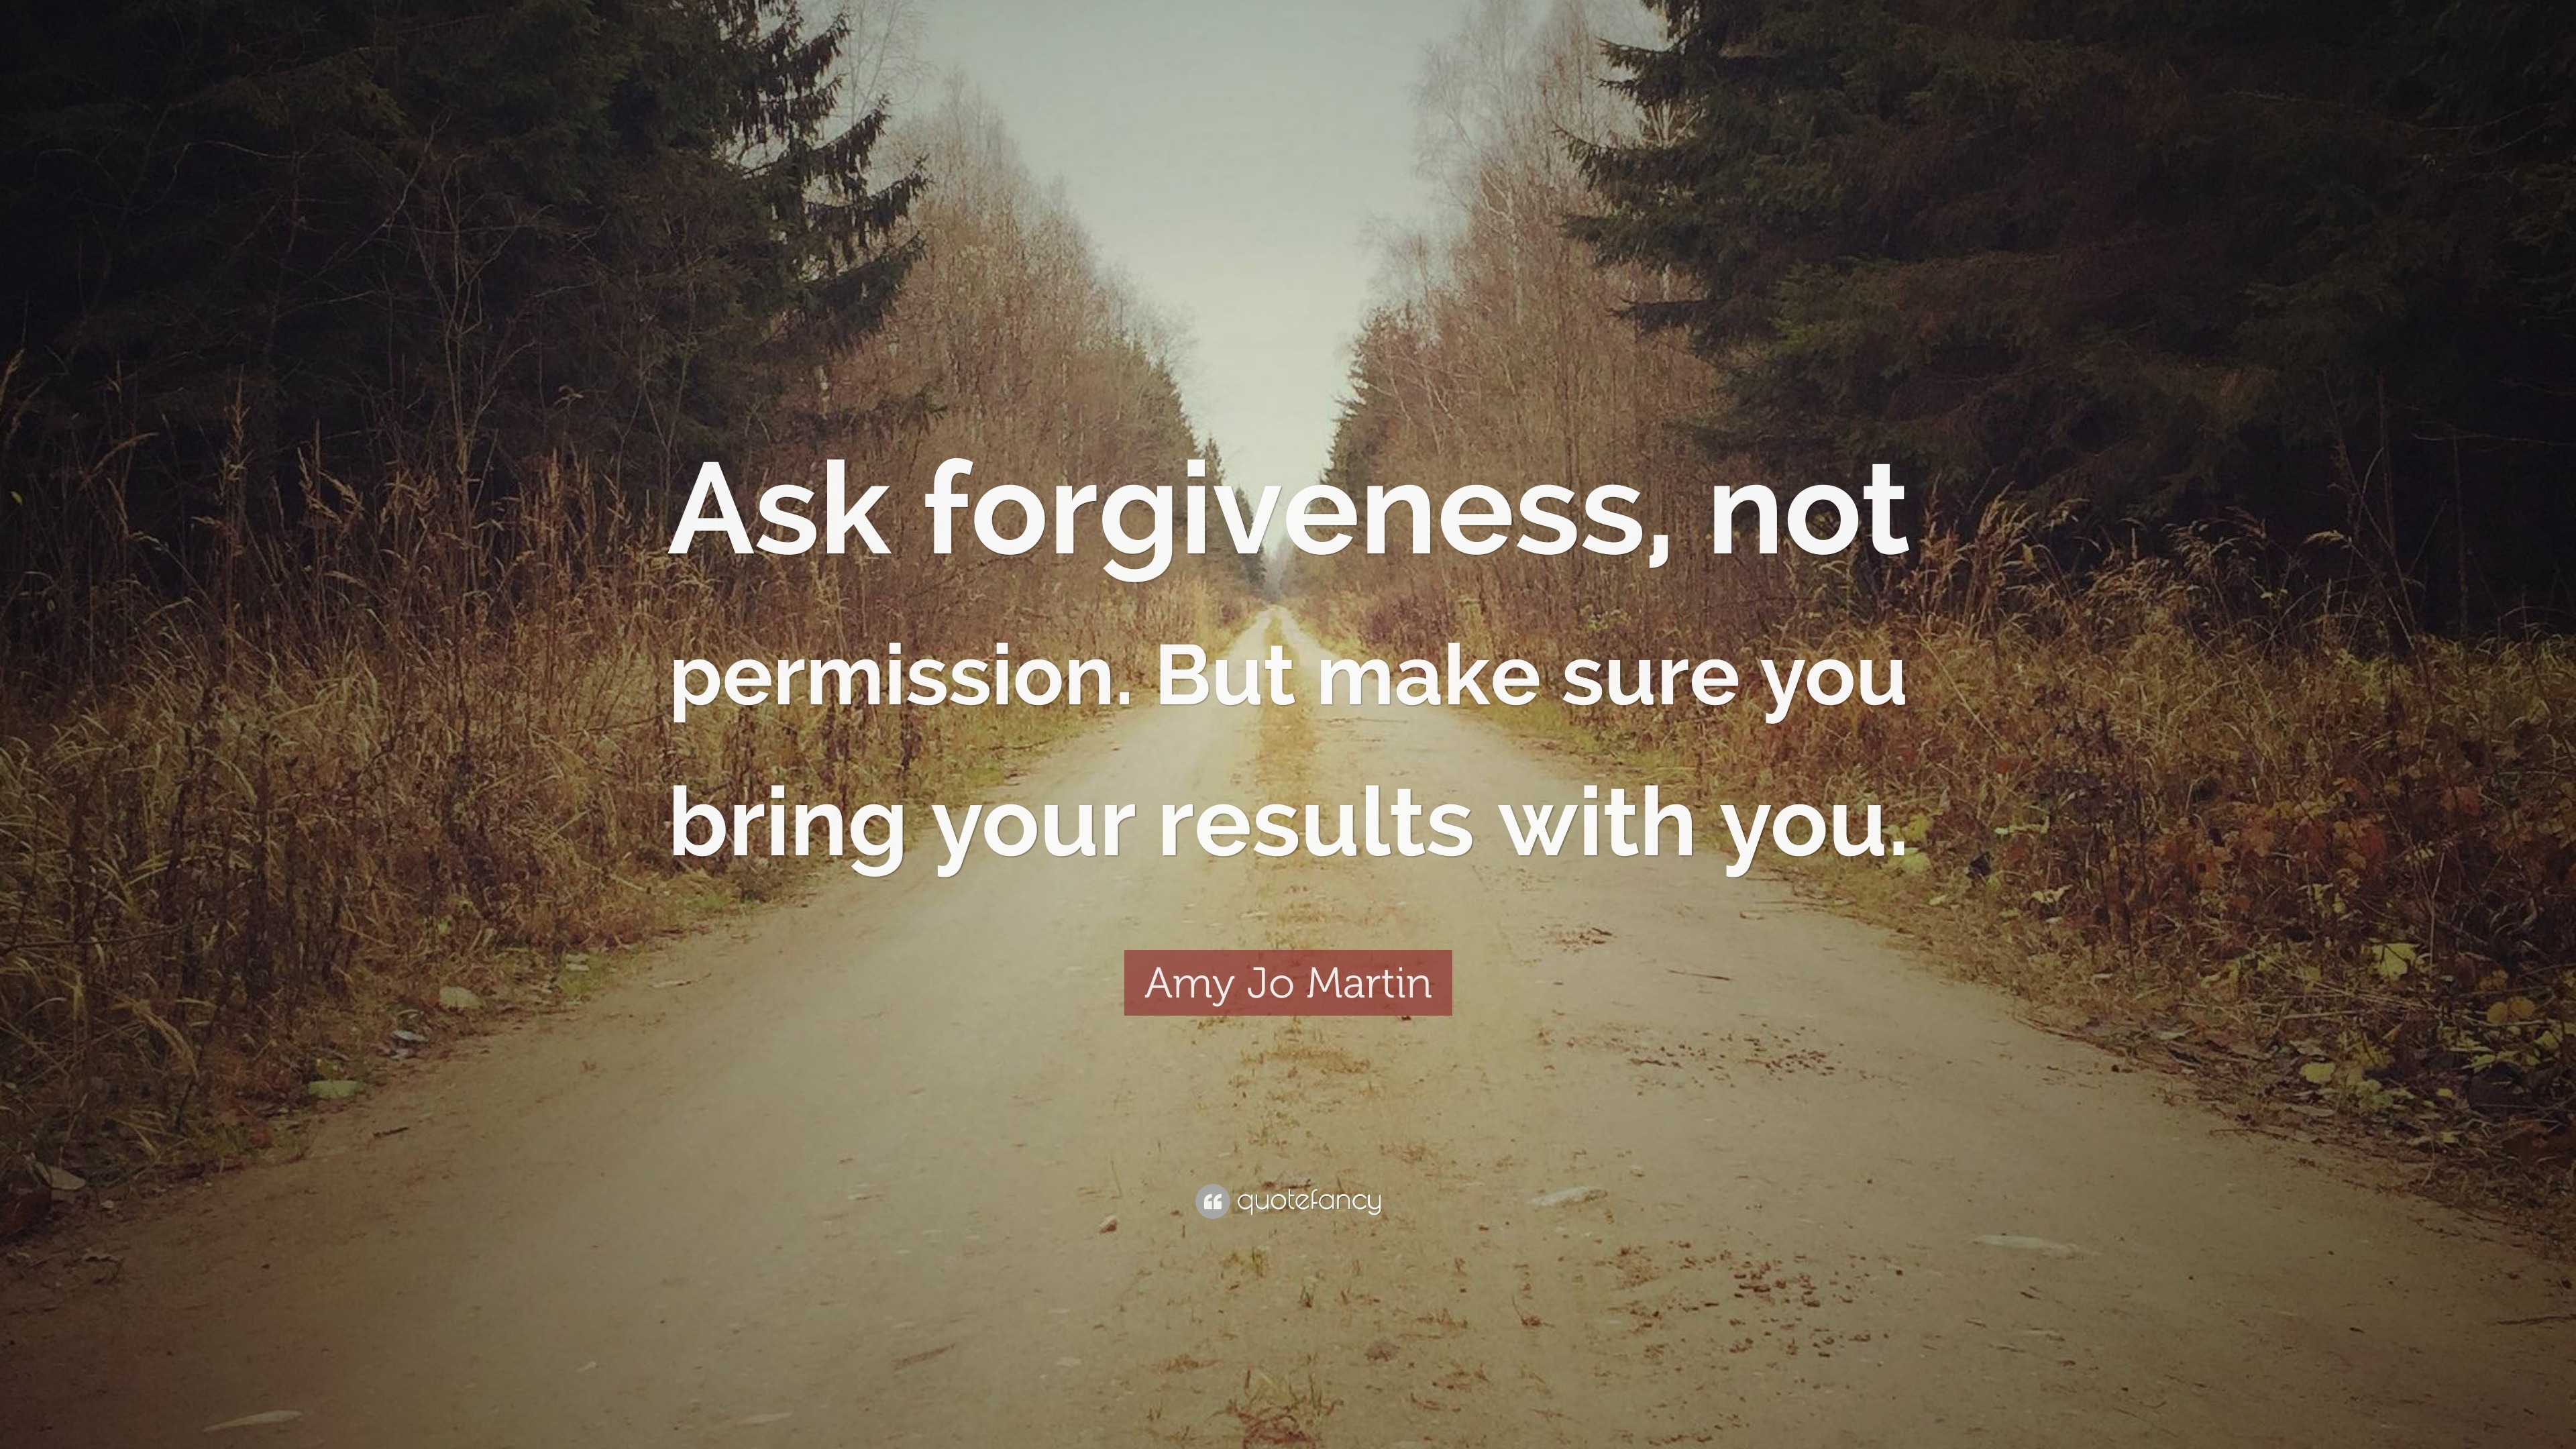 Amy Jo Martin Quote: “Ask forgiveness, not permission. But make sure